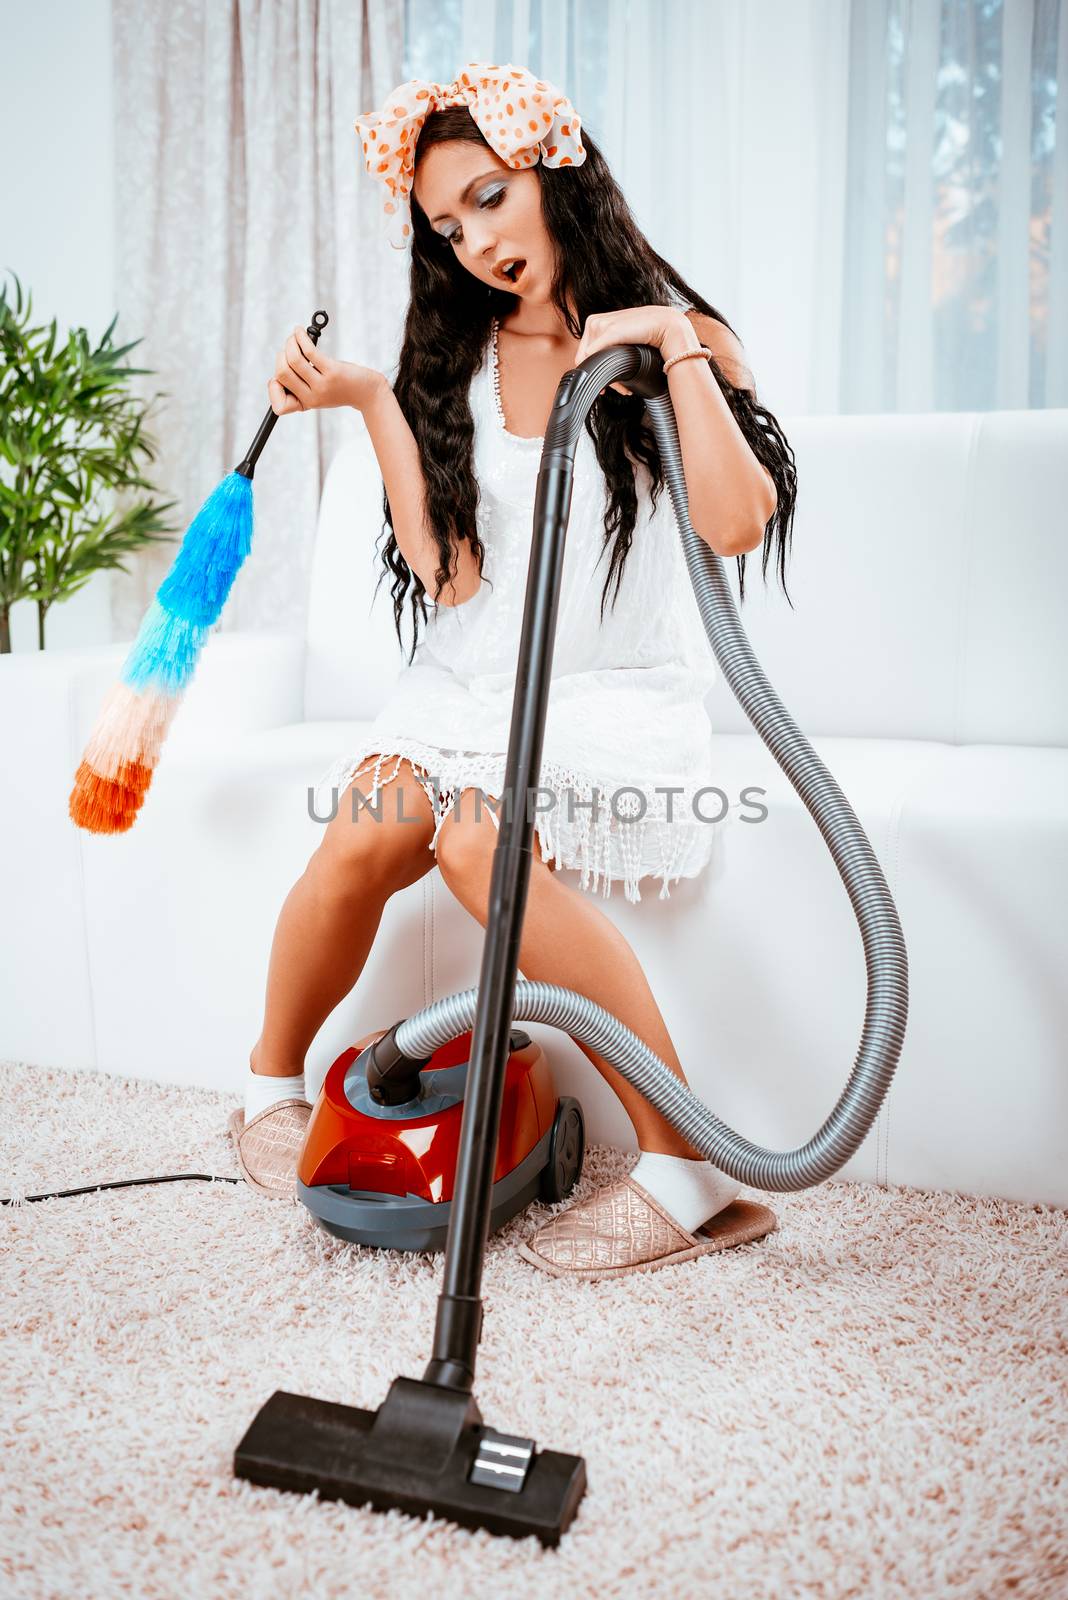 Bored young housewife standing leaning on vacuum cleaner tired of housework.